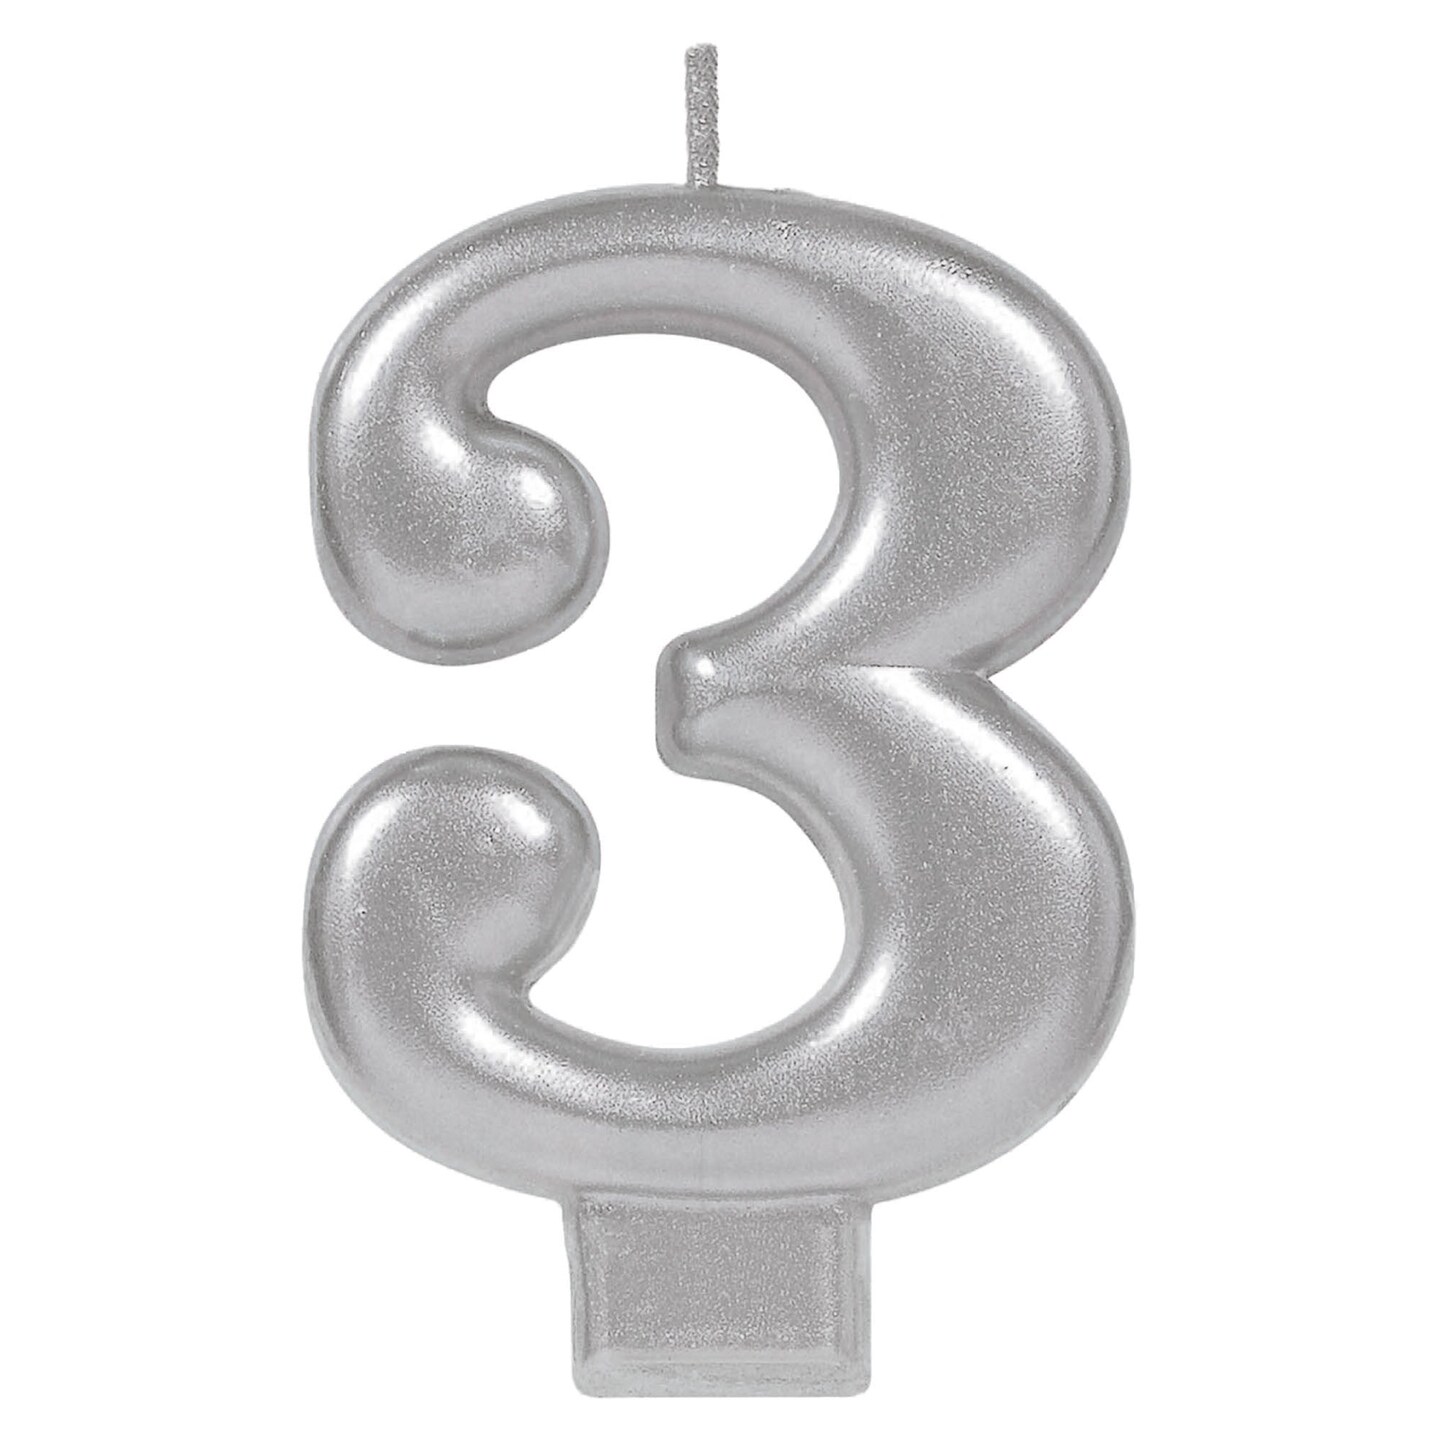 Numeral Metallic Birthday Candle #3 - Silver, 1ct